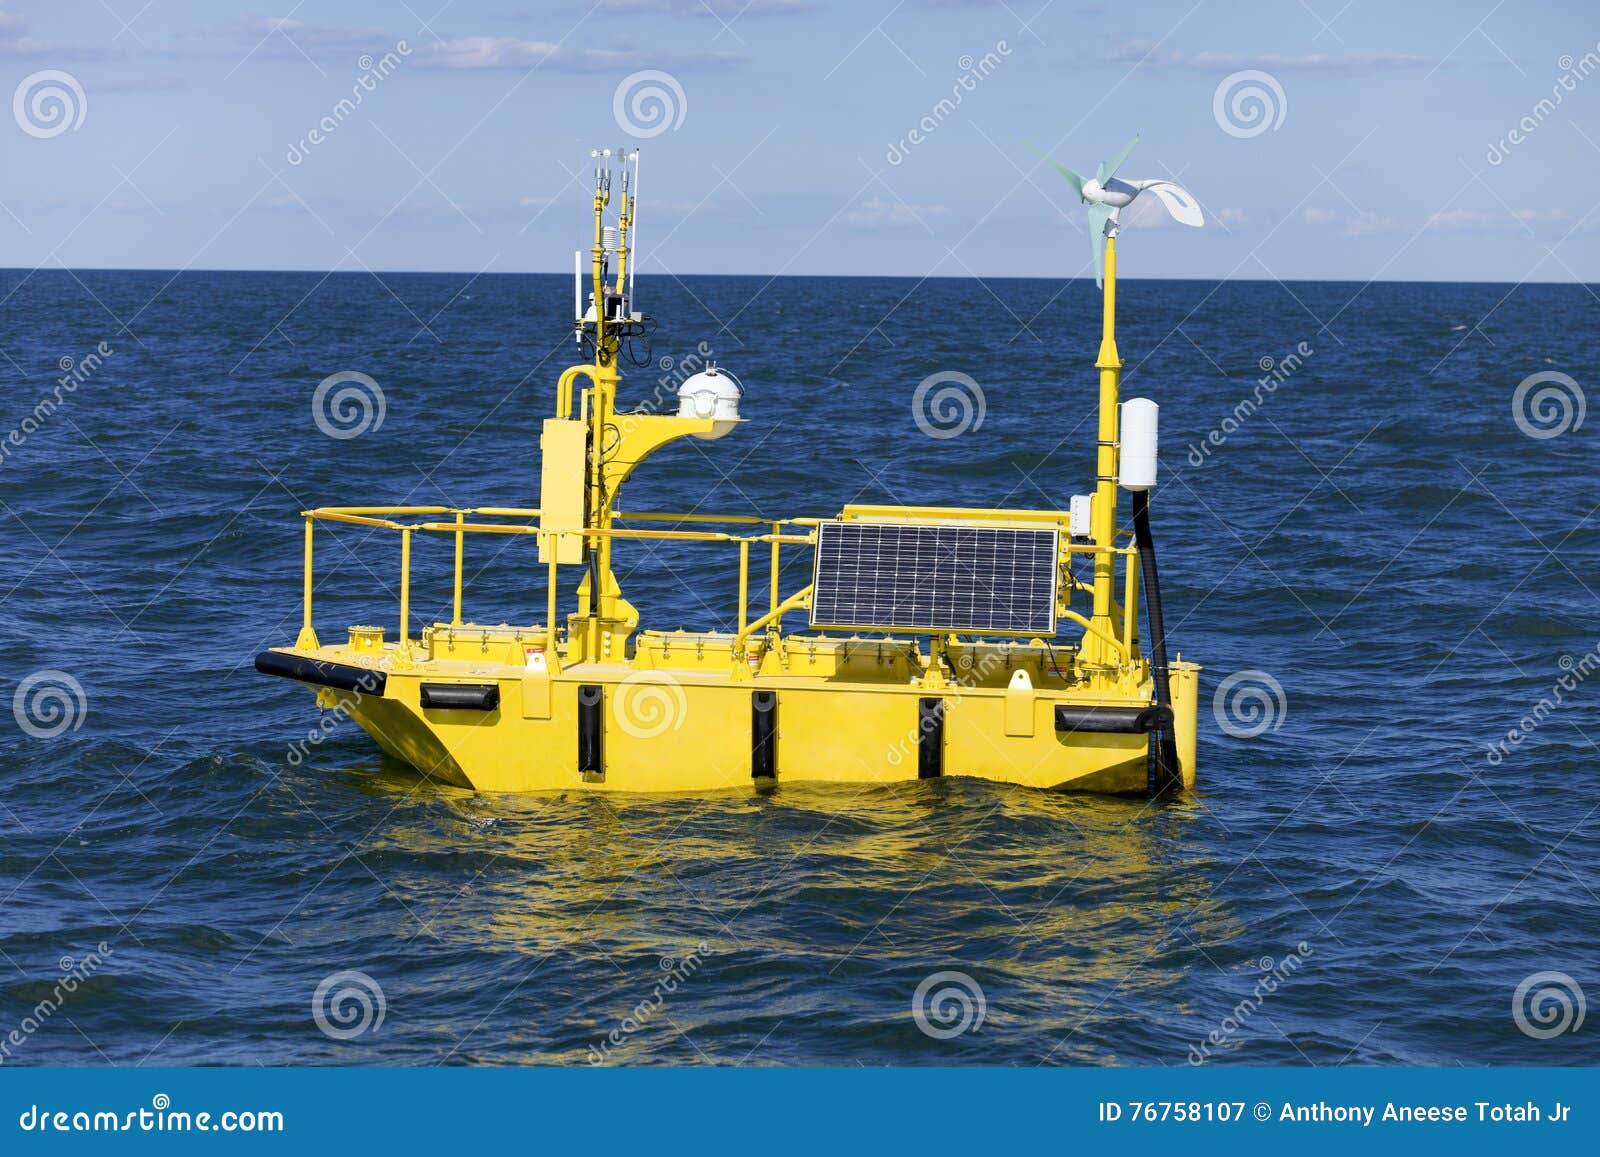 ocean weather research buoy